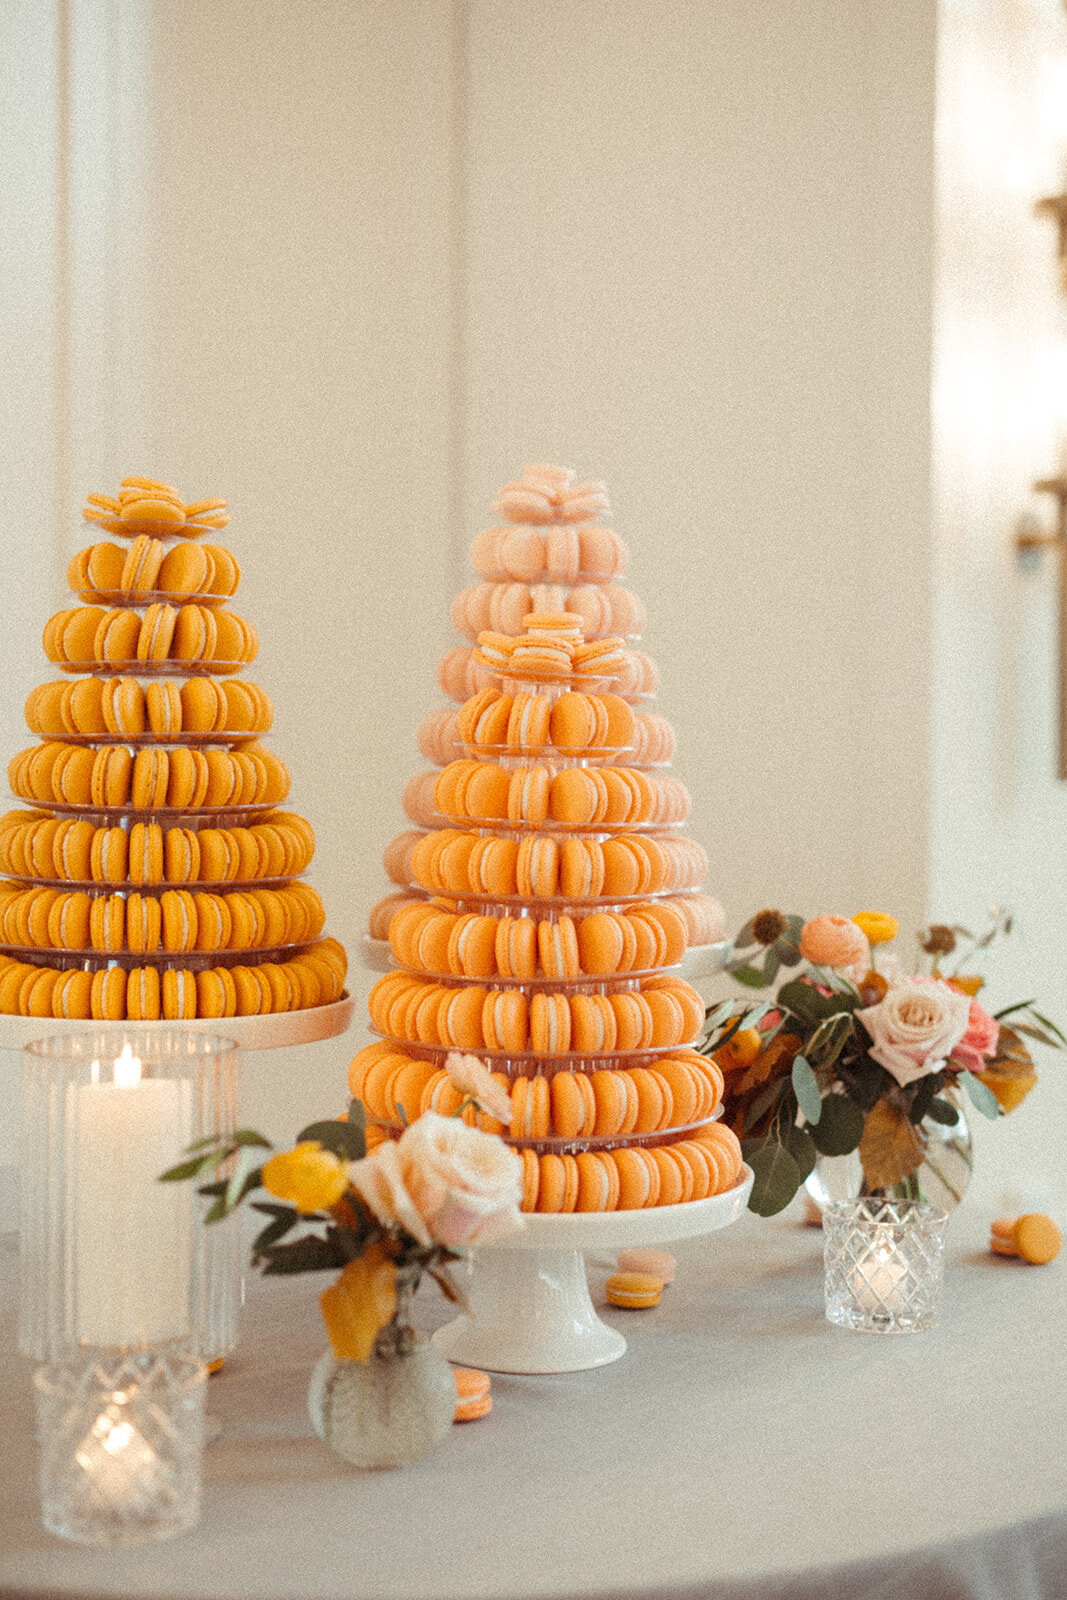 Two peach and orange macaroon towers on cake stands atop a table with candlesticks and flowers.